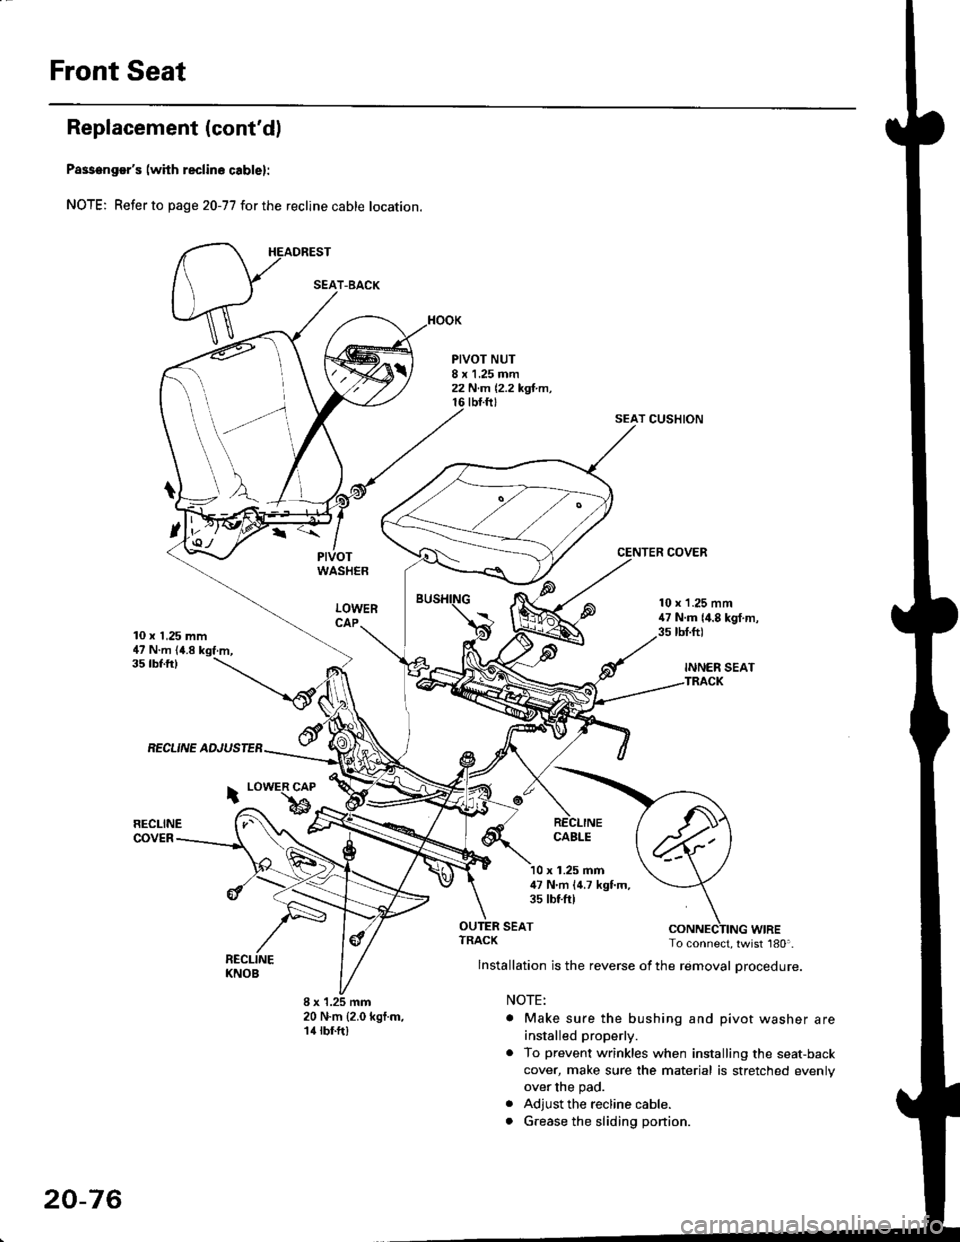 HONDA CIVIC 1998 6.G Workshop Manual Front Seat
Replacement (contd)
Passengers (with reclino cablel:
NOTE; Refer to page 20-77 for the recline cable location.
HEADREST
PIVOTWASHER
LOWERCAP
PIVOT NUT8 x 1.25 mm22 N.m 12,2 kgl.m,tbt.ftt
